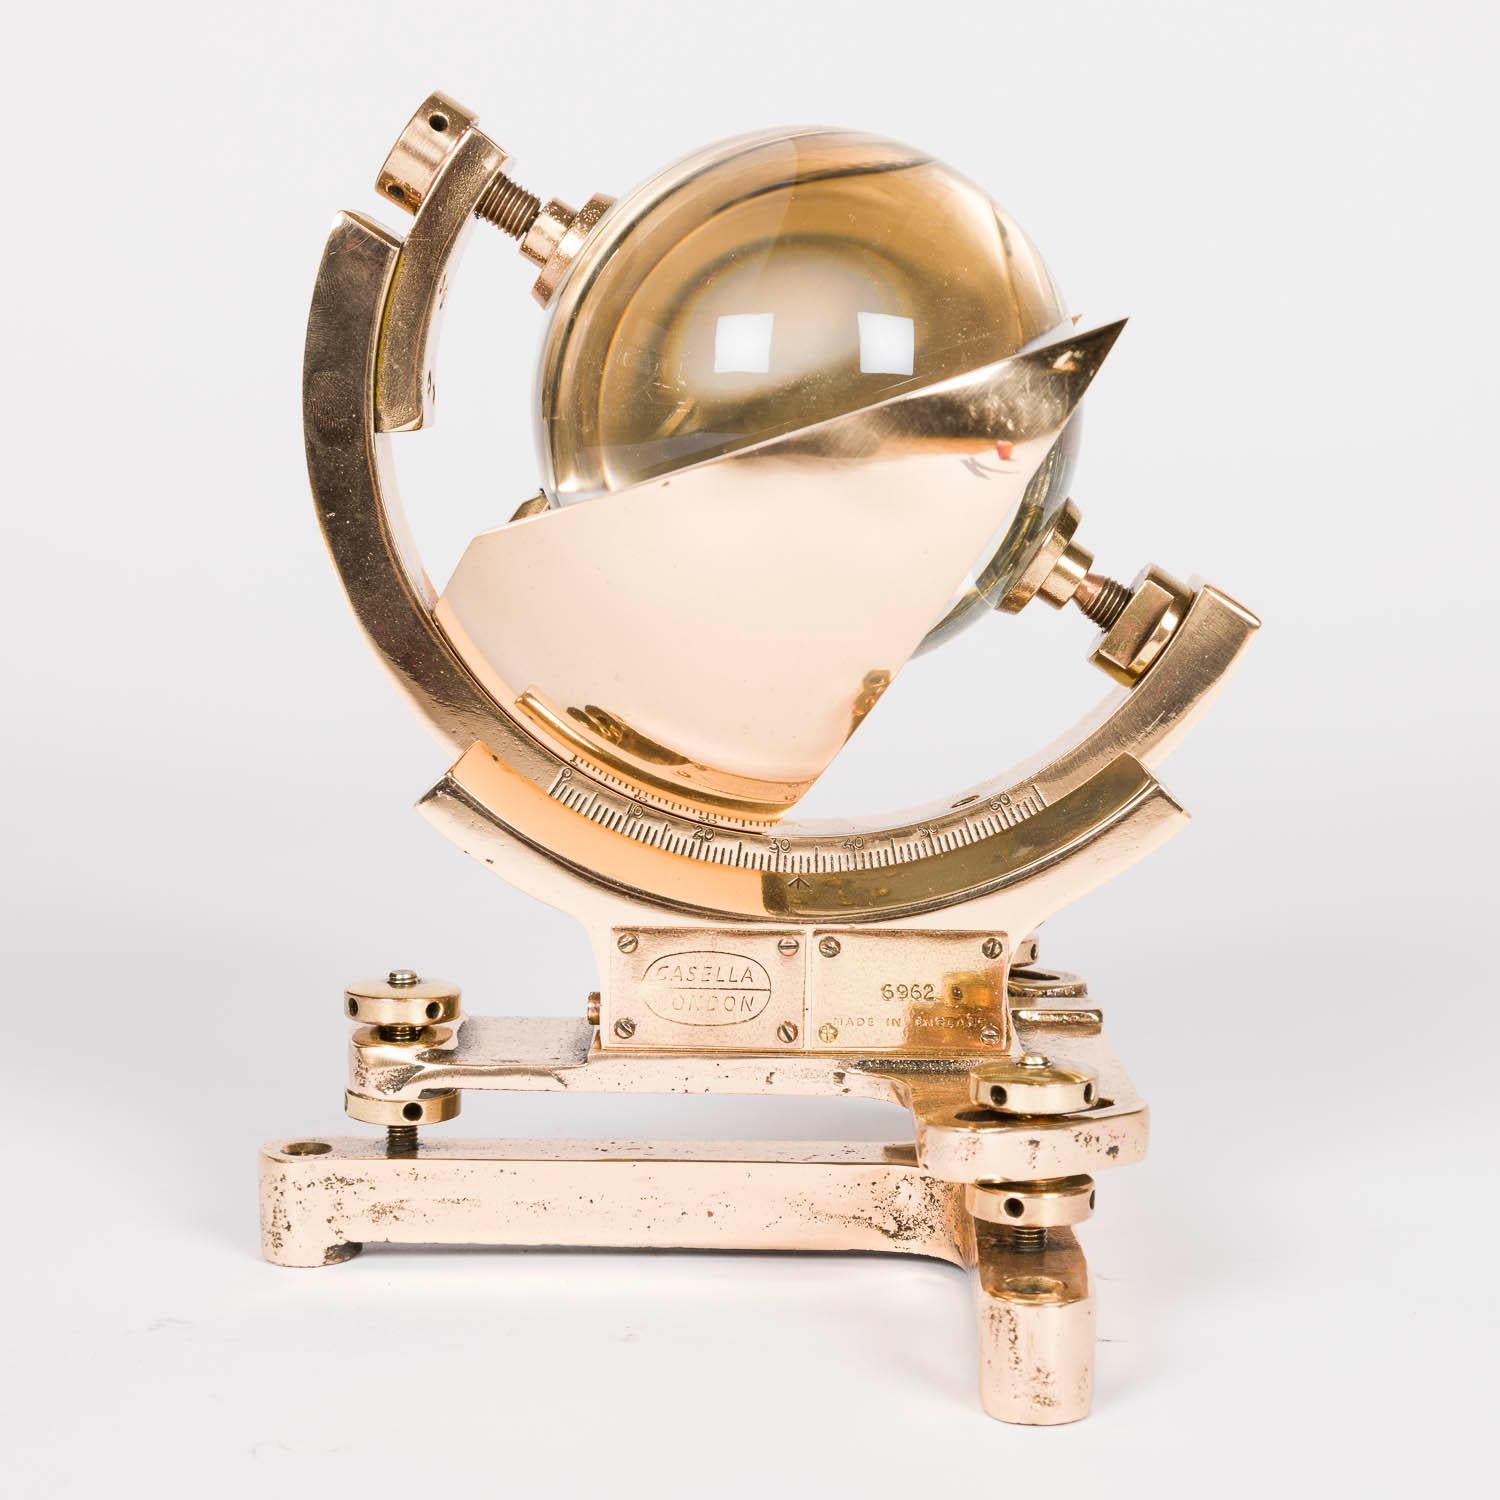 20th Century Campbell–Stokes sunshine recorder by Casella & Co of London For Sale